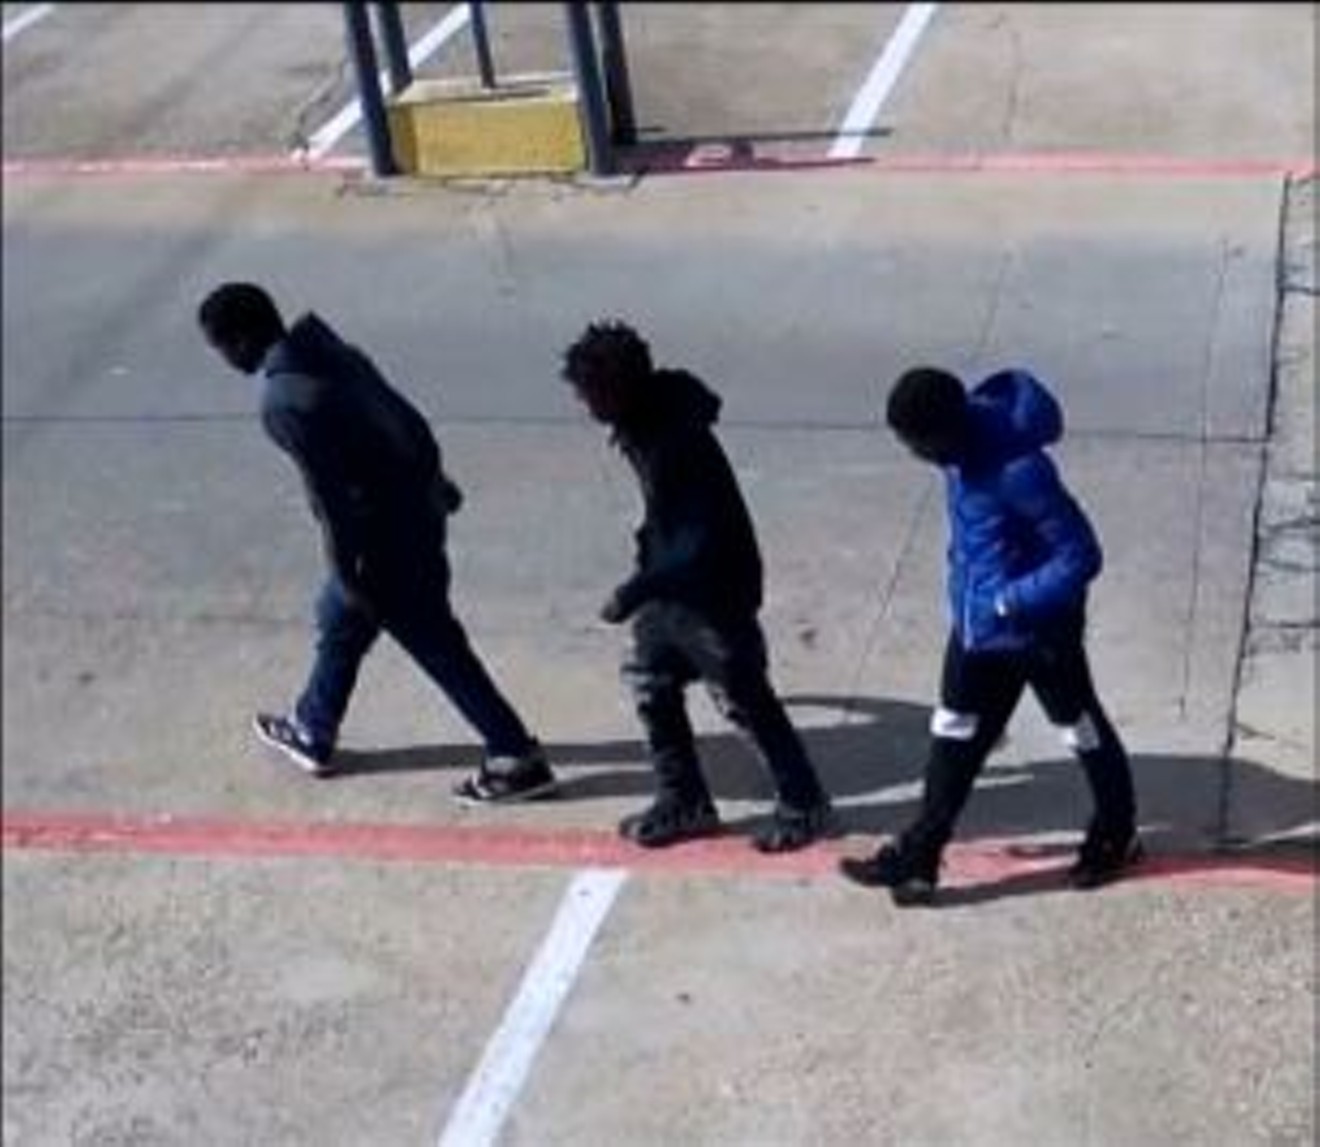 DPD needs help finding these three.